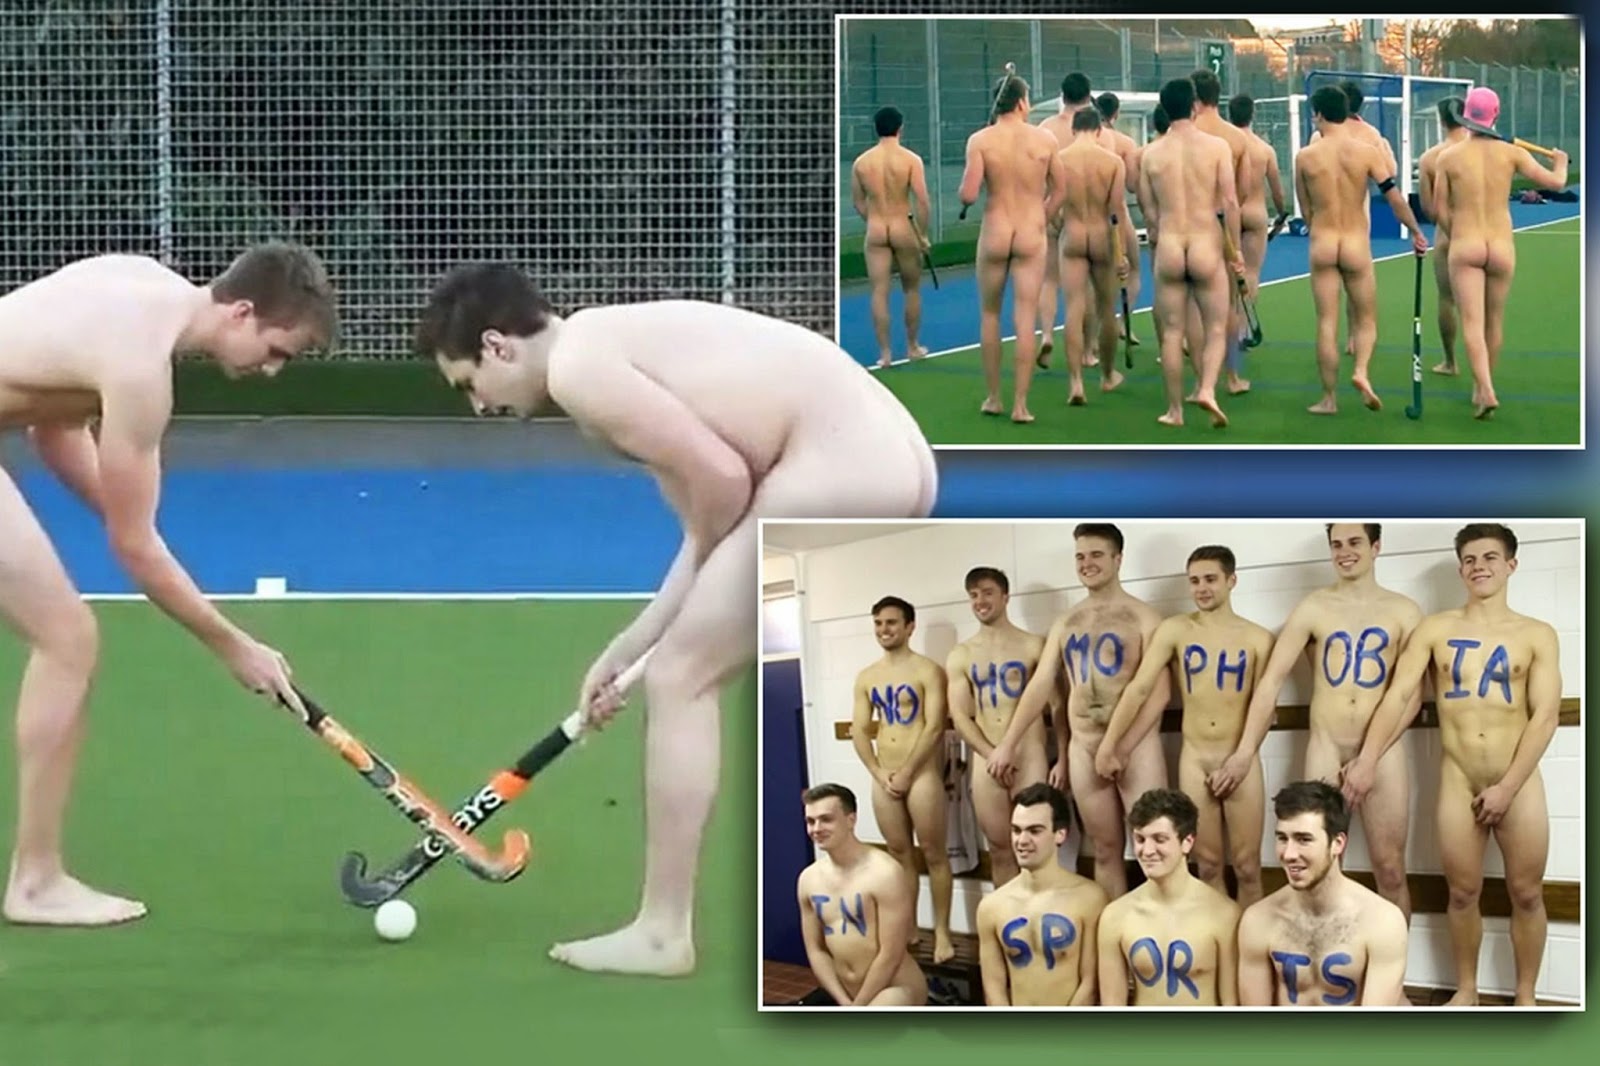 University Of Nottingham Men's Field Hockey Team Plays NAKED To Stand ...